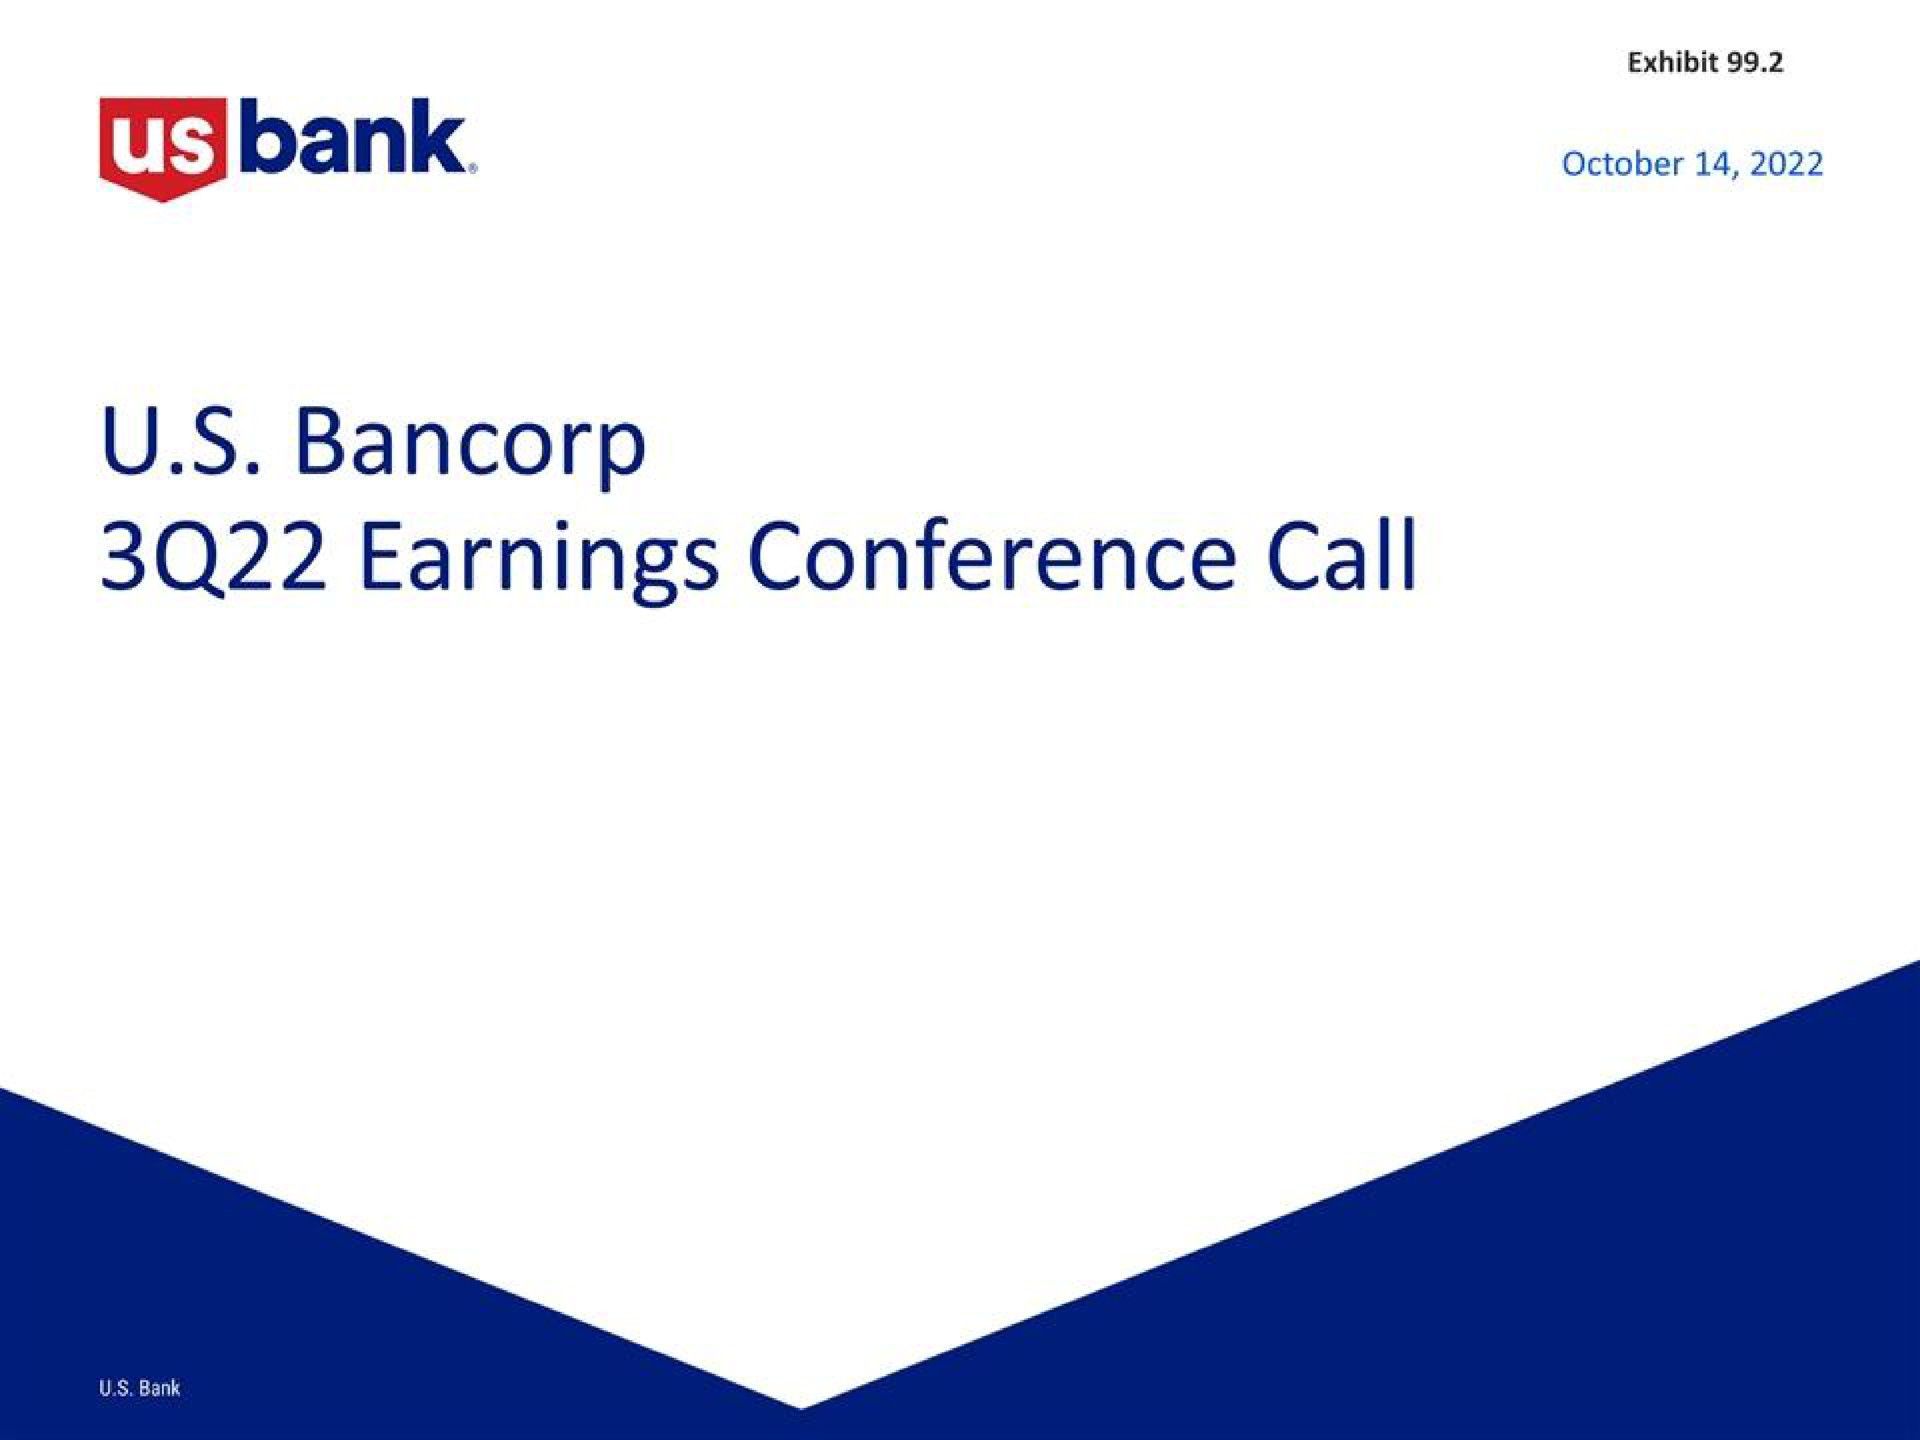 earnings conference call | U.S. Bancorp